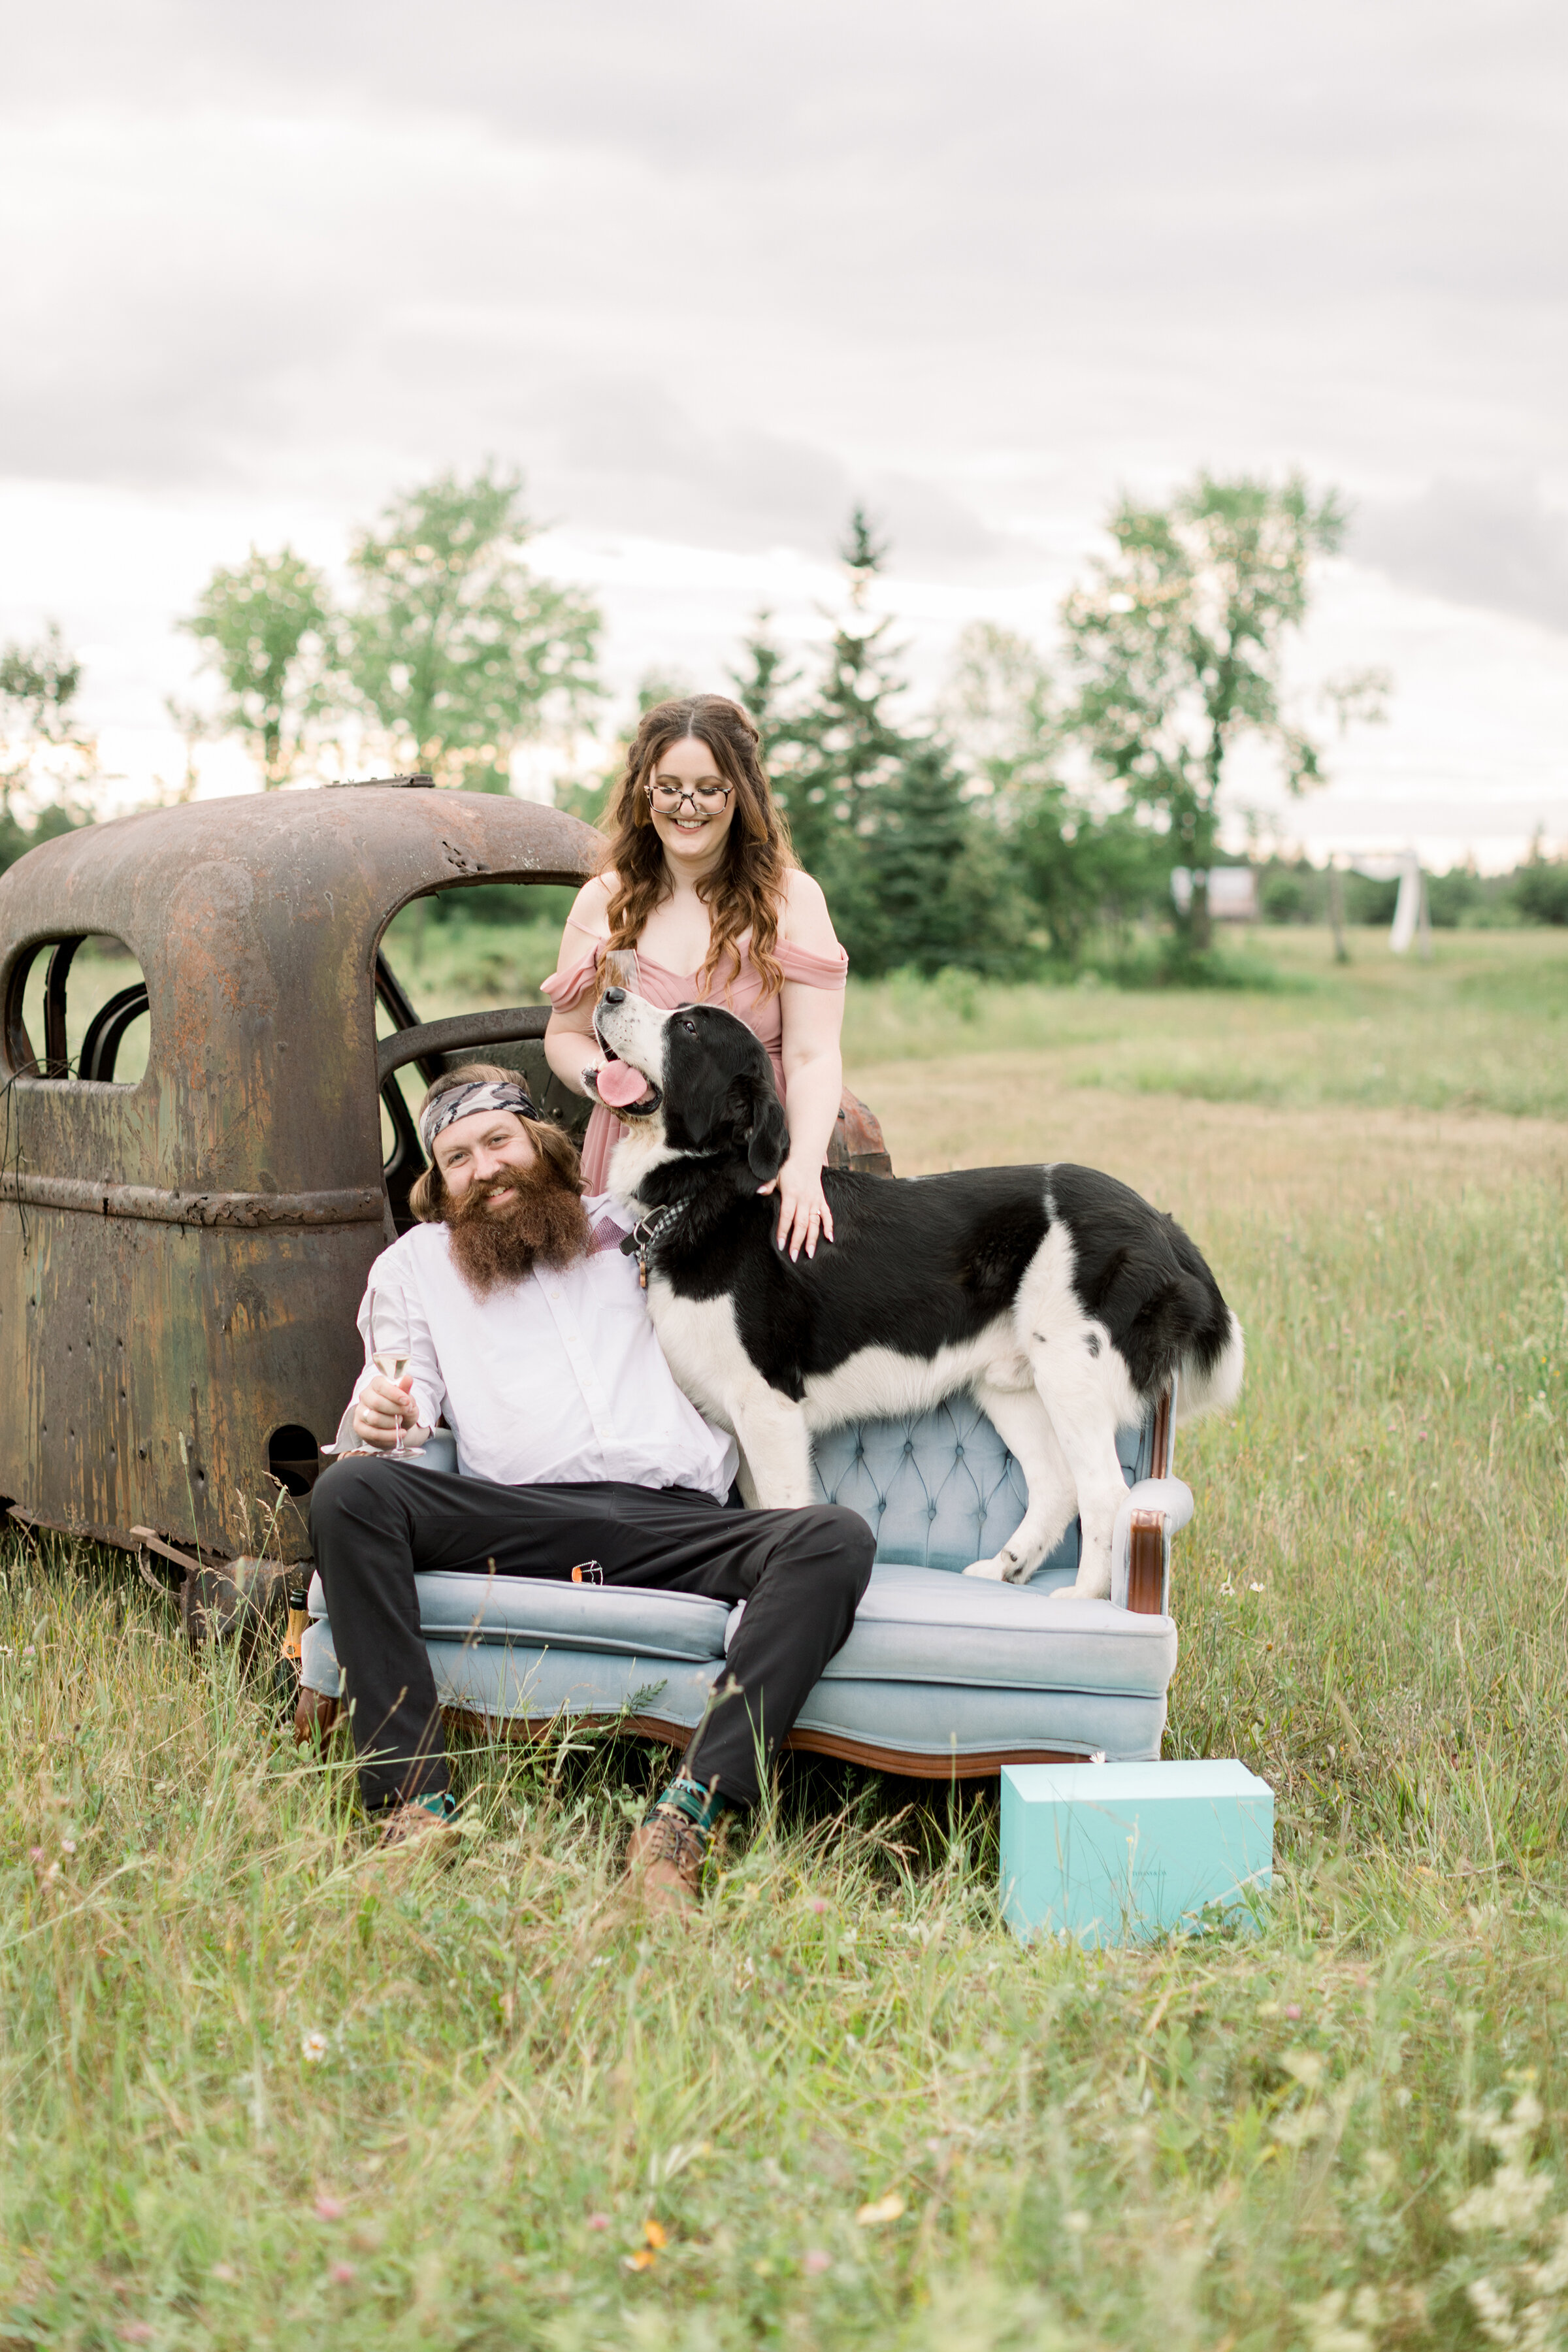  A couple celebrate the engagement with Champaign as their dog joins the fun in a unique outdoor engagement photo shoot by Chelsea Mason Photography. Outdoor engagement session inspiration ideas and goals for Smith Falls Ontario Canada engagement loc